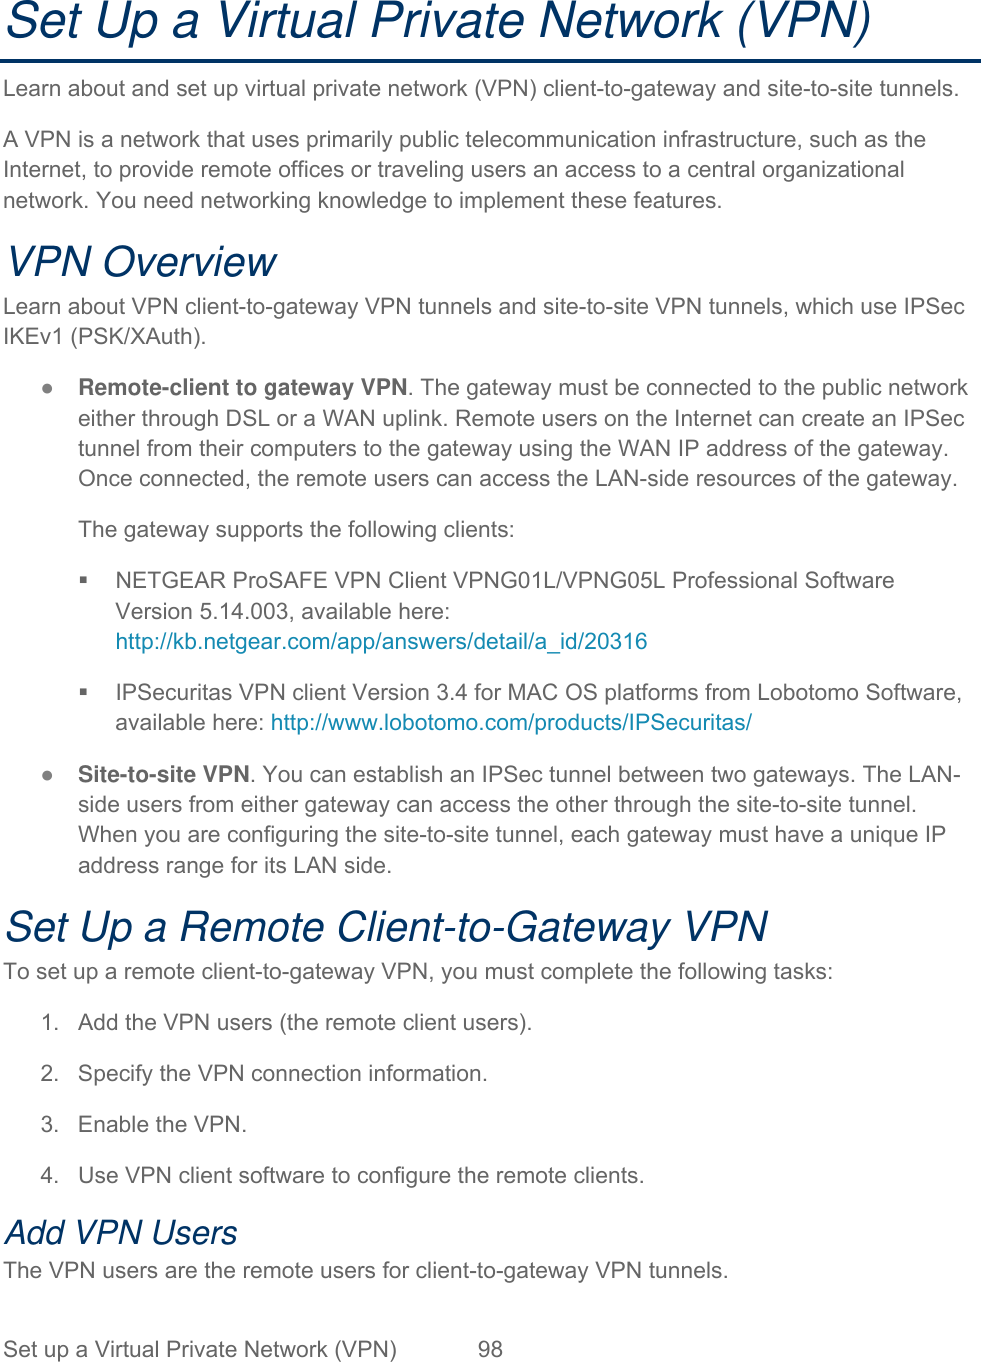 Set up a Virtual Private Network (VPN)  98   Set Up a Virtual Private Network (VPN) Learn about and set up virtual private network (VPN) client-to-gateway and site-to-site tunnels.  A VPN is a network that uses primarily public telecommunication infrastructure, such as the Internet, to provide remote offices or traveling users an access to a central organizational network. You need networking knowledge to implement these features.  VPN Overview Learn about VPN client-to-gateway VPN tunnels and site-to-site VPN tunnels, which use IPSec IKEv1 (PSK/XAuth).  ● Remote-client to gateway VPN. The gateway must be connected to the public network either through DSL or a WAN uplink. Remote users on the Internet can create an IPSec tunnel from their computers to the gateway using the WAN IP address of the gateway. Once connected, the remote users can access the LAN-side resources of the gateway.  The gateway supports the following clients:   NETGEAR ProSAFE VPN Client VPNG01L/VPNG05L Professional Software Version 5.14.003, available here: http://kb.netgear.com/app/answers/detail/a_id/20316   IPSecuritas VPN client Version 3.4 for MAC OS platforms from Lobotomo Software, available here: http://www.lobotomo.com/products/IPSecuritas/ ● Site-to-site VPN. You can establish an IPSec tunnel between two gateways. The LAN-side users from either gateway can access the other through the site-to-site tunnel. When you are configuring the site-to-site tunnel, each gateway must have a unique IP address range for its LAN side. Set Up a Remote Client-to-Gateway VPN To set up a remote client-to-gateway VPN, you must complete the following tasks: 1.  Add the VPN users (the remote client users). 2.  Specify the VPN connection information. 3.  Enable the VPN. 4.  Use VPN client software to configure the remote clients. Add VPN Users The VPN users are the remote users for client-to-gateway VPN tunnels. 